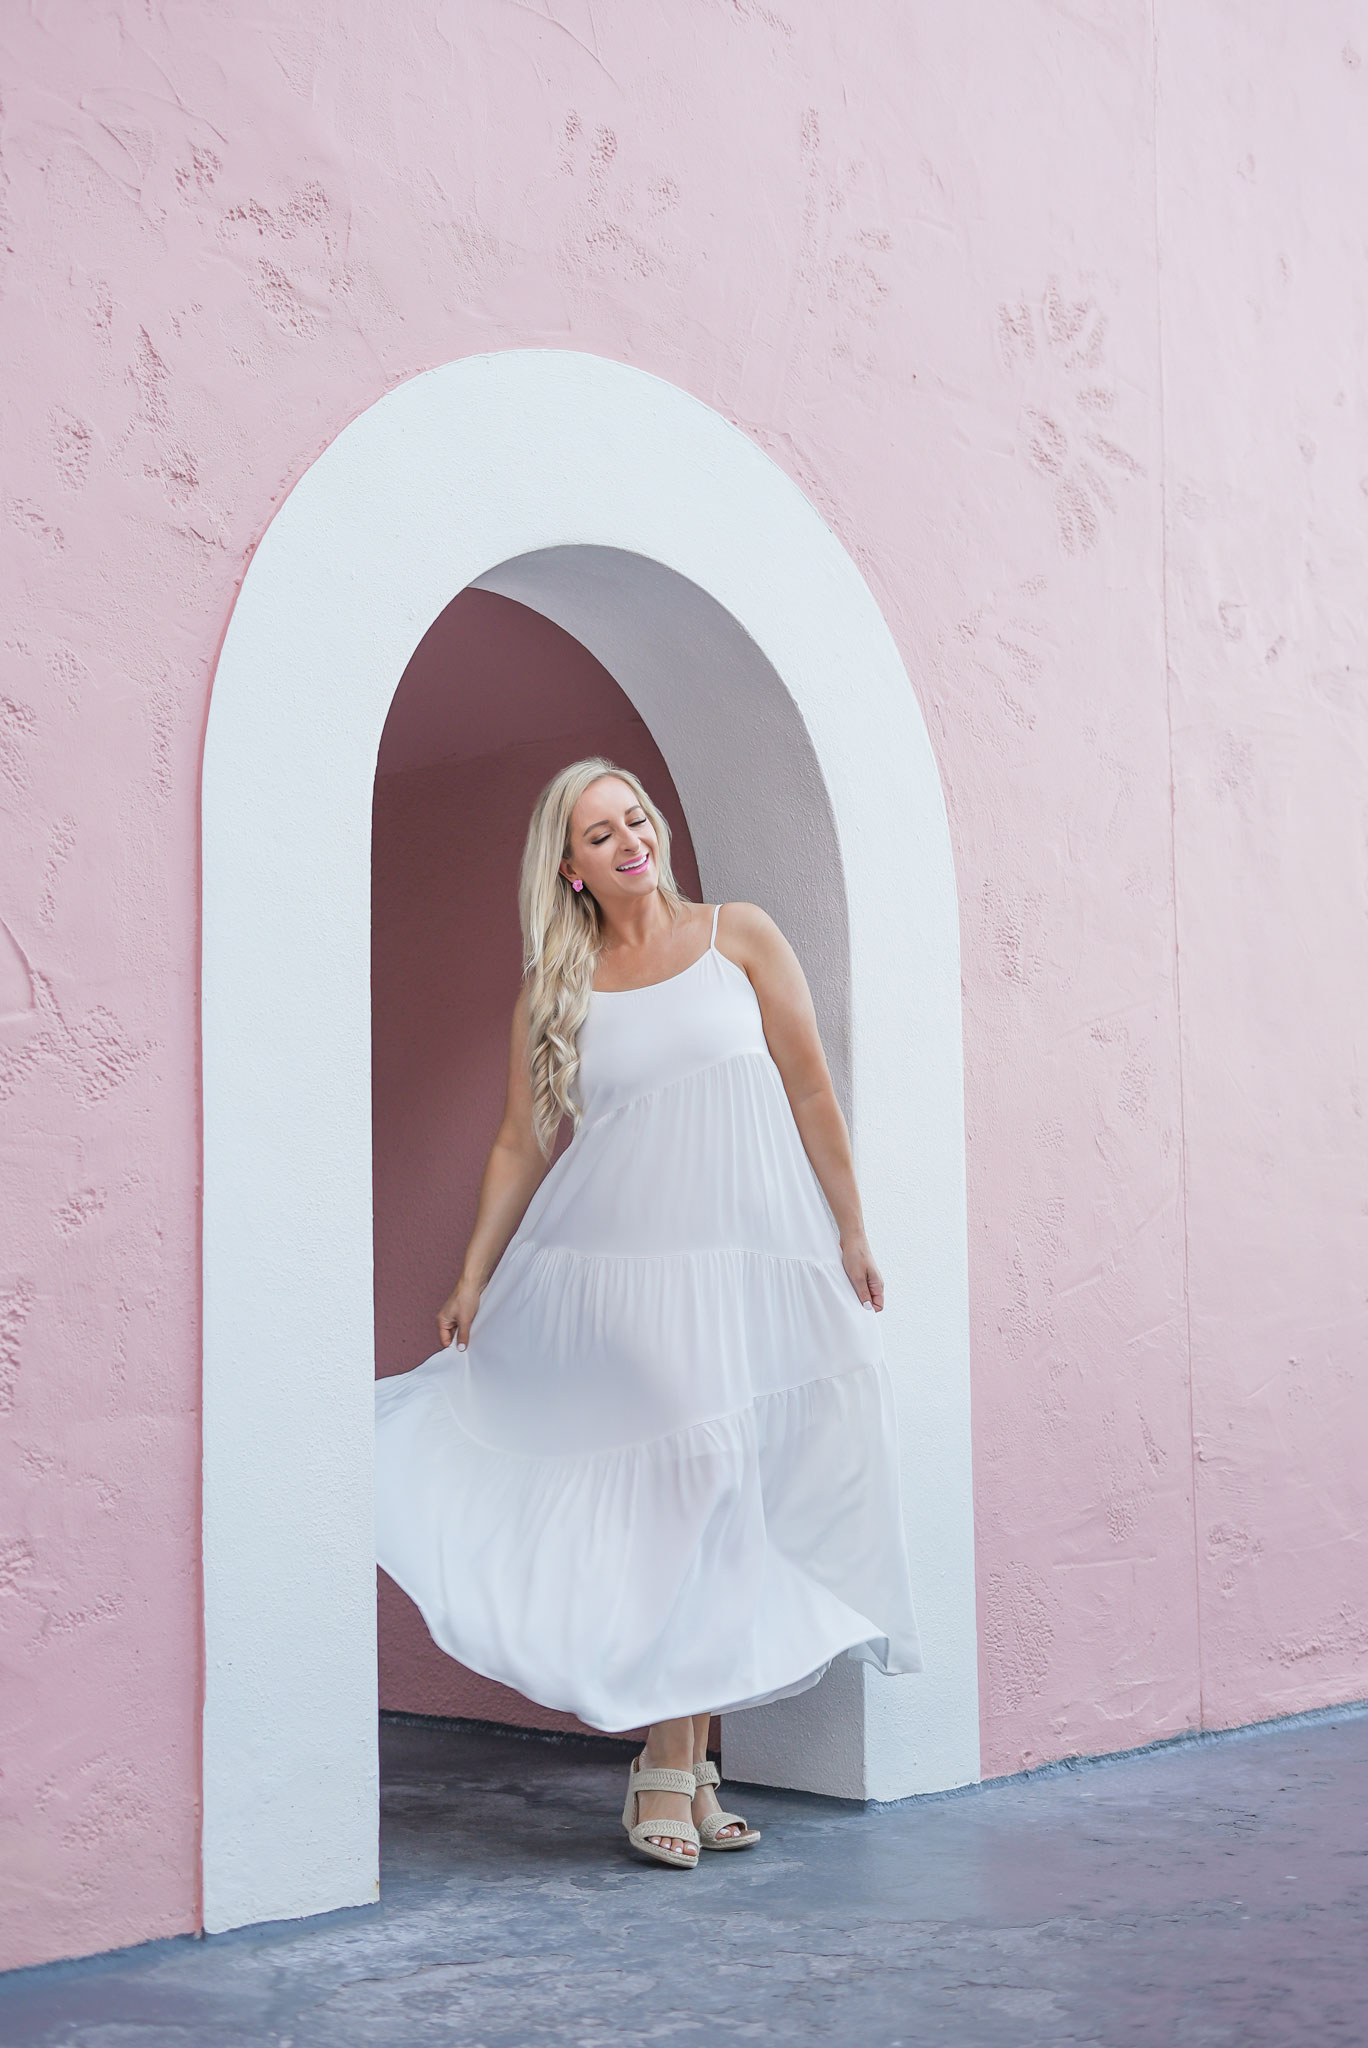 Florida Blogger, Jill DiGioia, The Lovely Flamingo wears pink hibiscus earrings from her new beach earring collection with a white maxi beach dress and standing in front of the Don Cesar Hotel on St. Pete Beach.